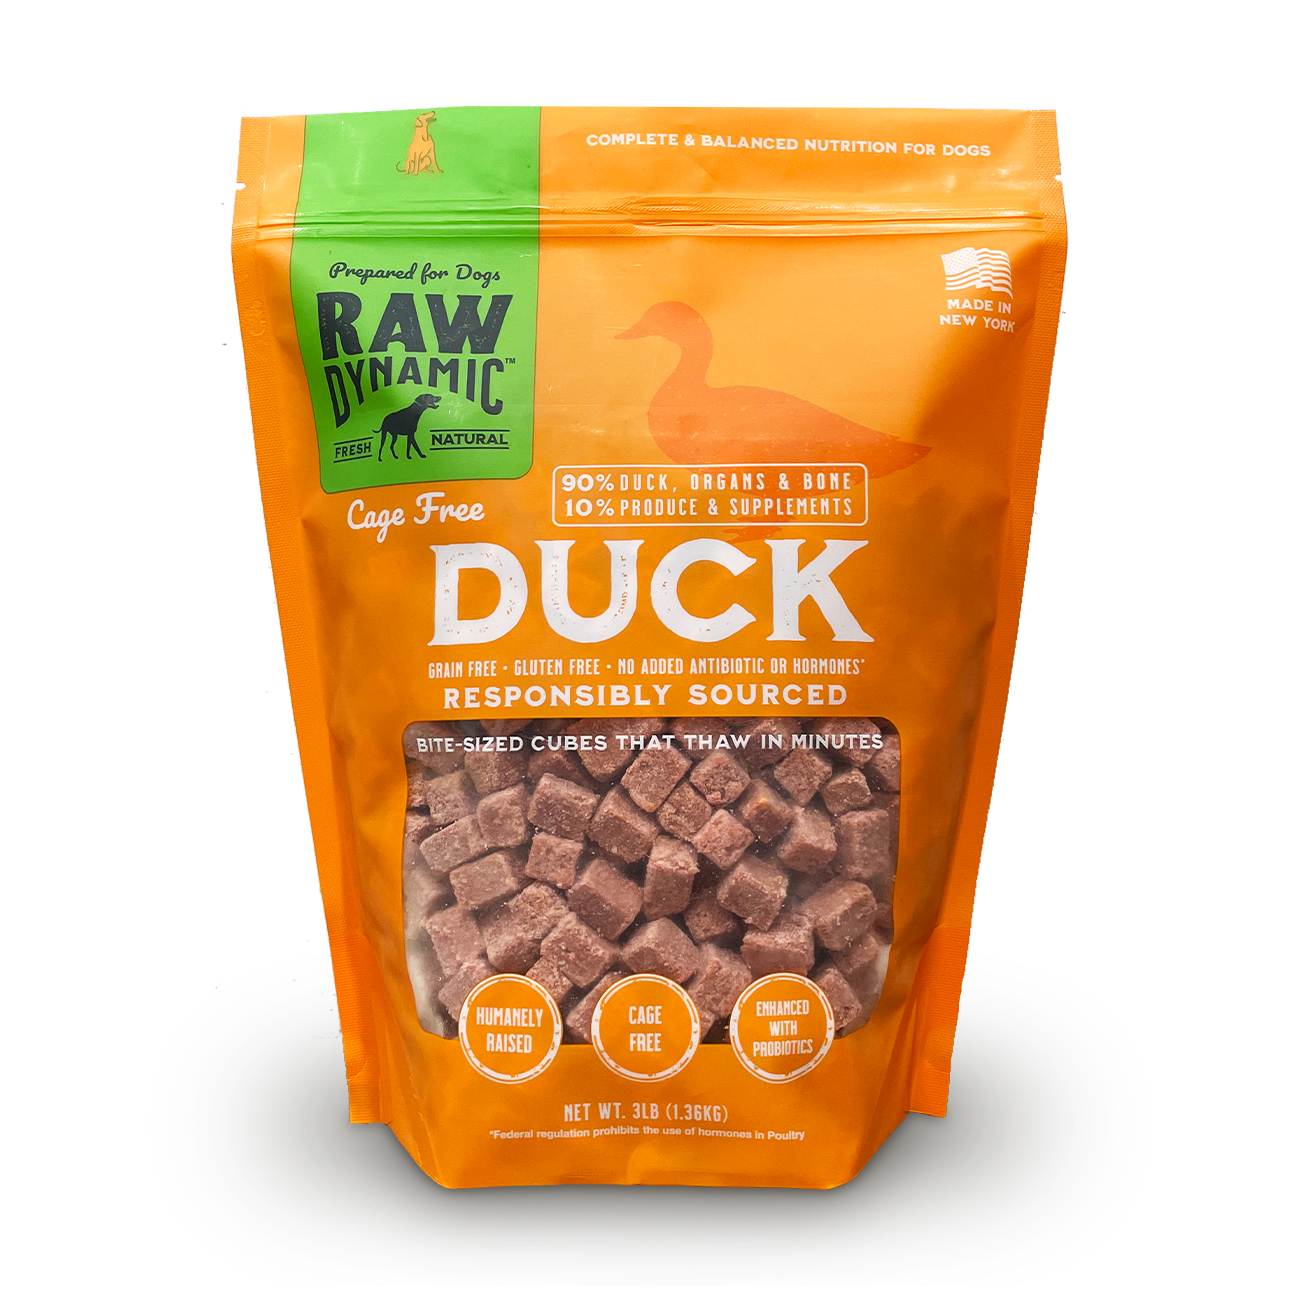 DUCK FORMULA FOR DOGS